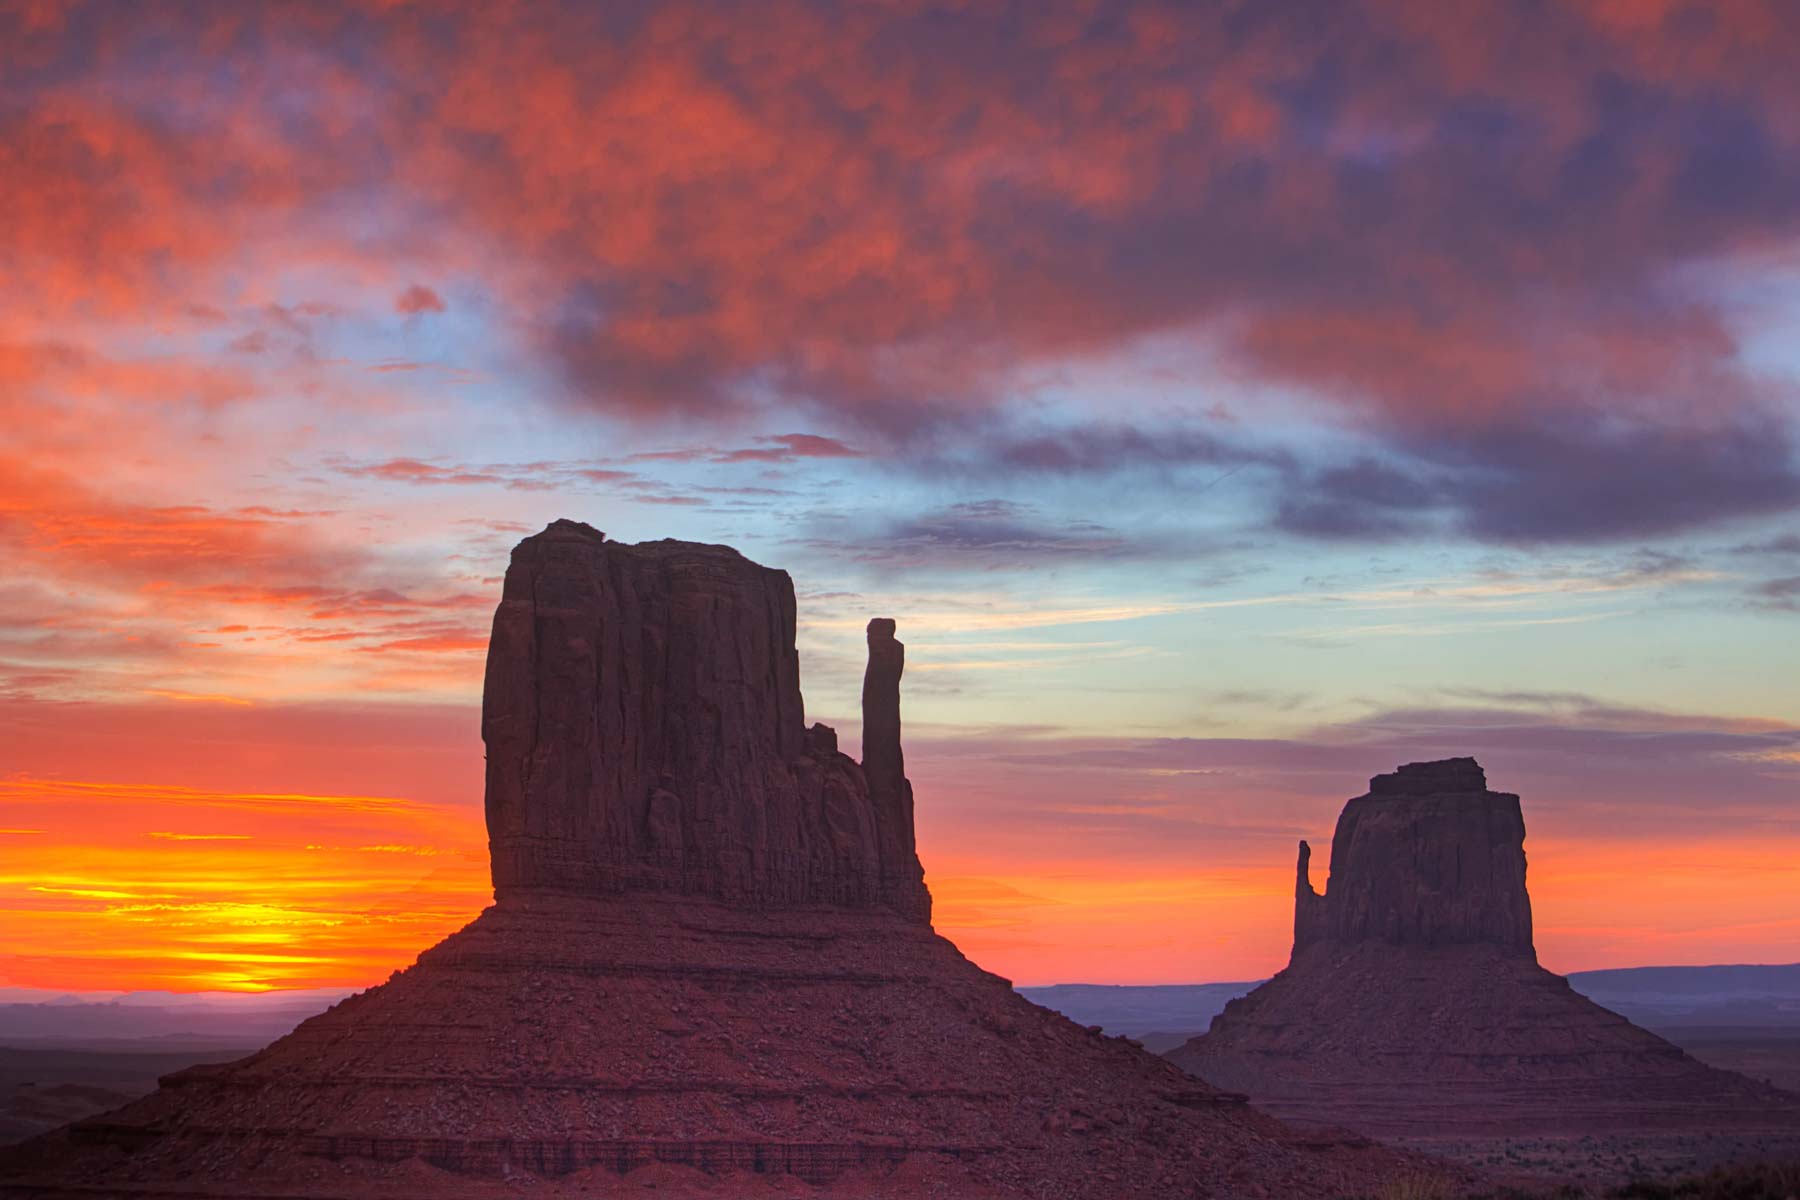 he Mittens in Monument Valley at sunrise